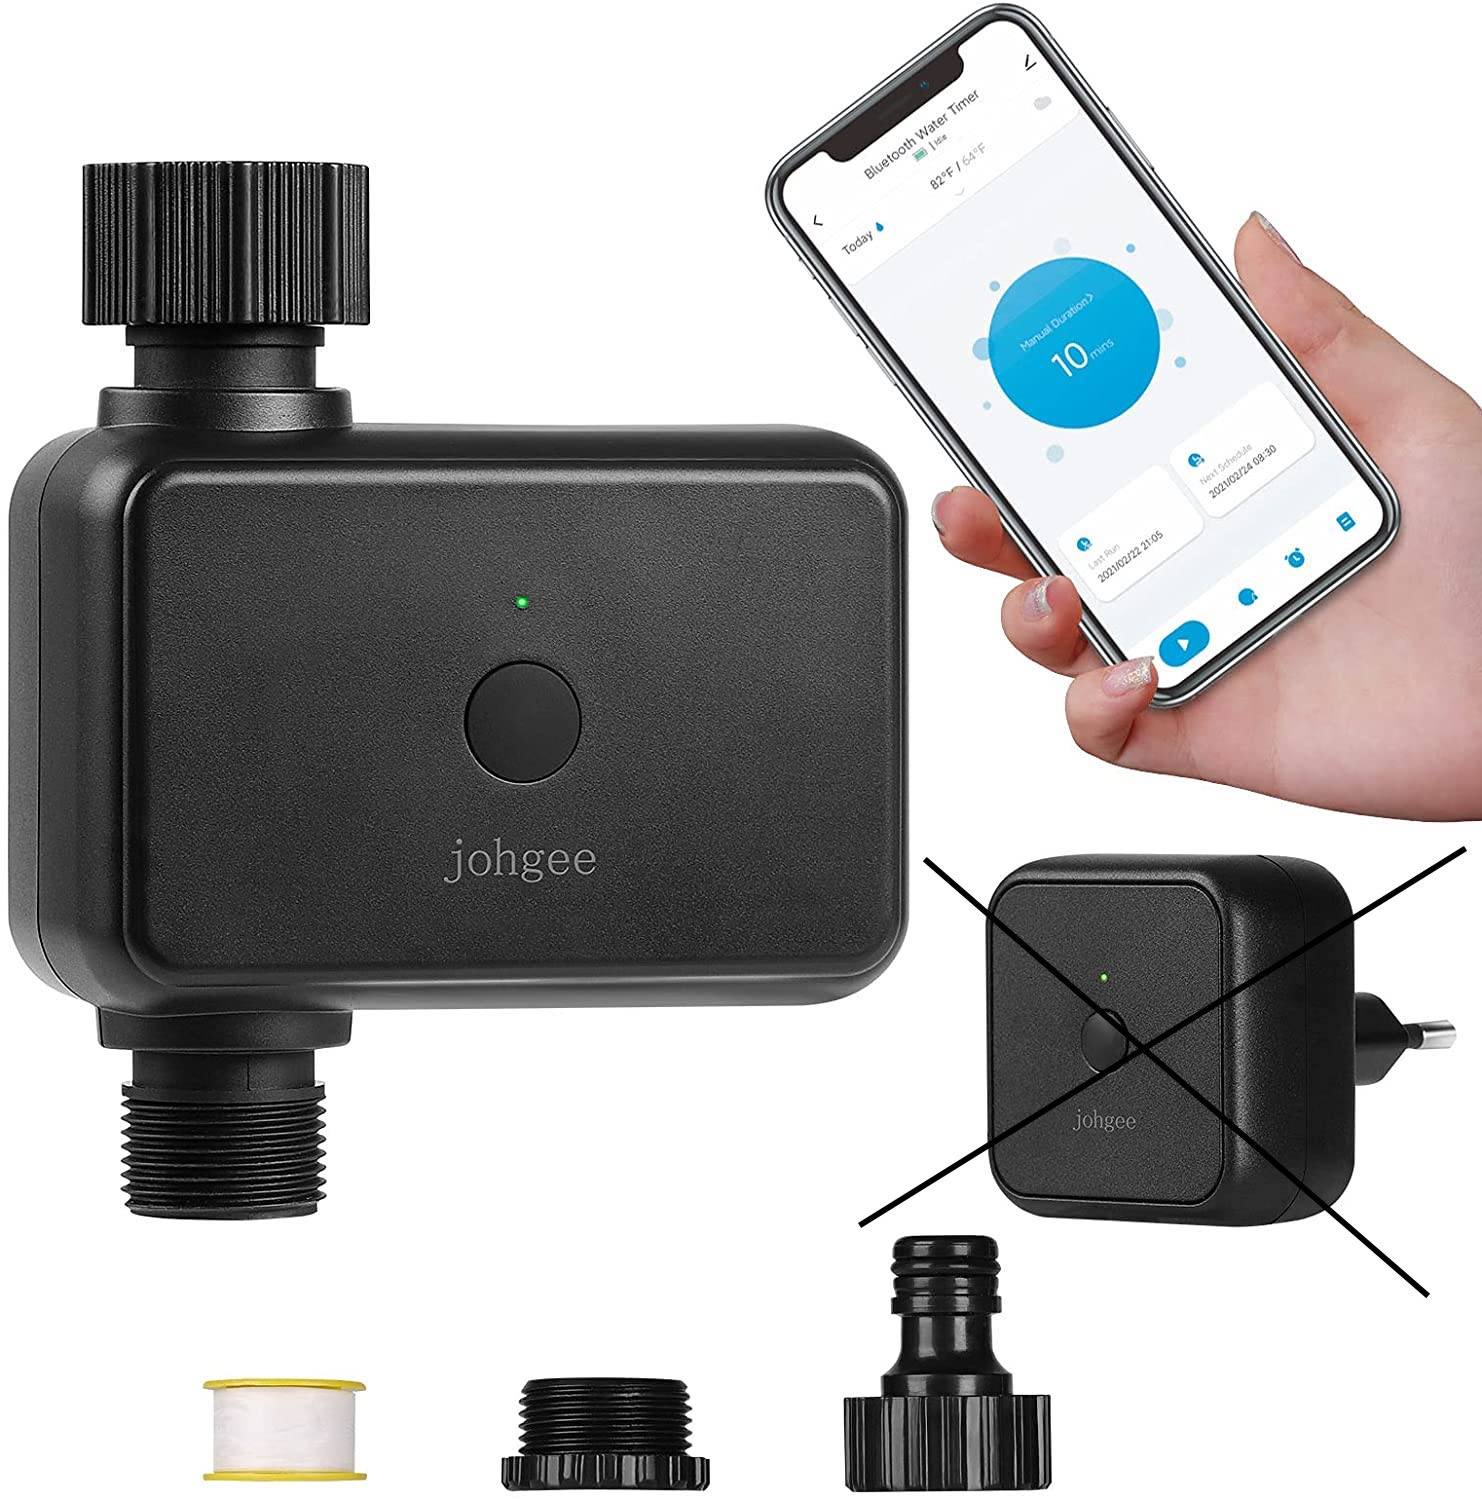 Bluetooth And WiFi Irrigation Programmer, Intelligent Automatic Watering Timer, Garden Watering Control With App Control For Duration And Rain Delay.  Up To 8 Bar Pressure!